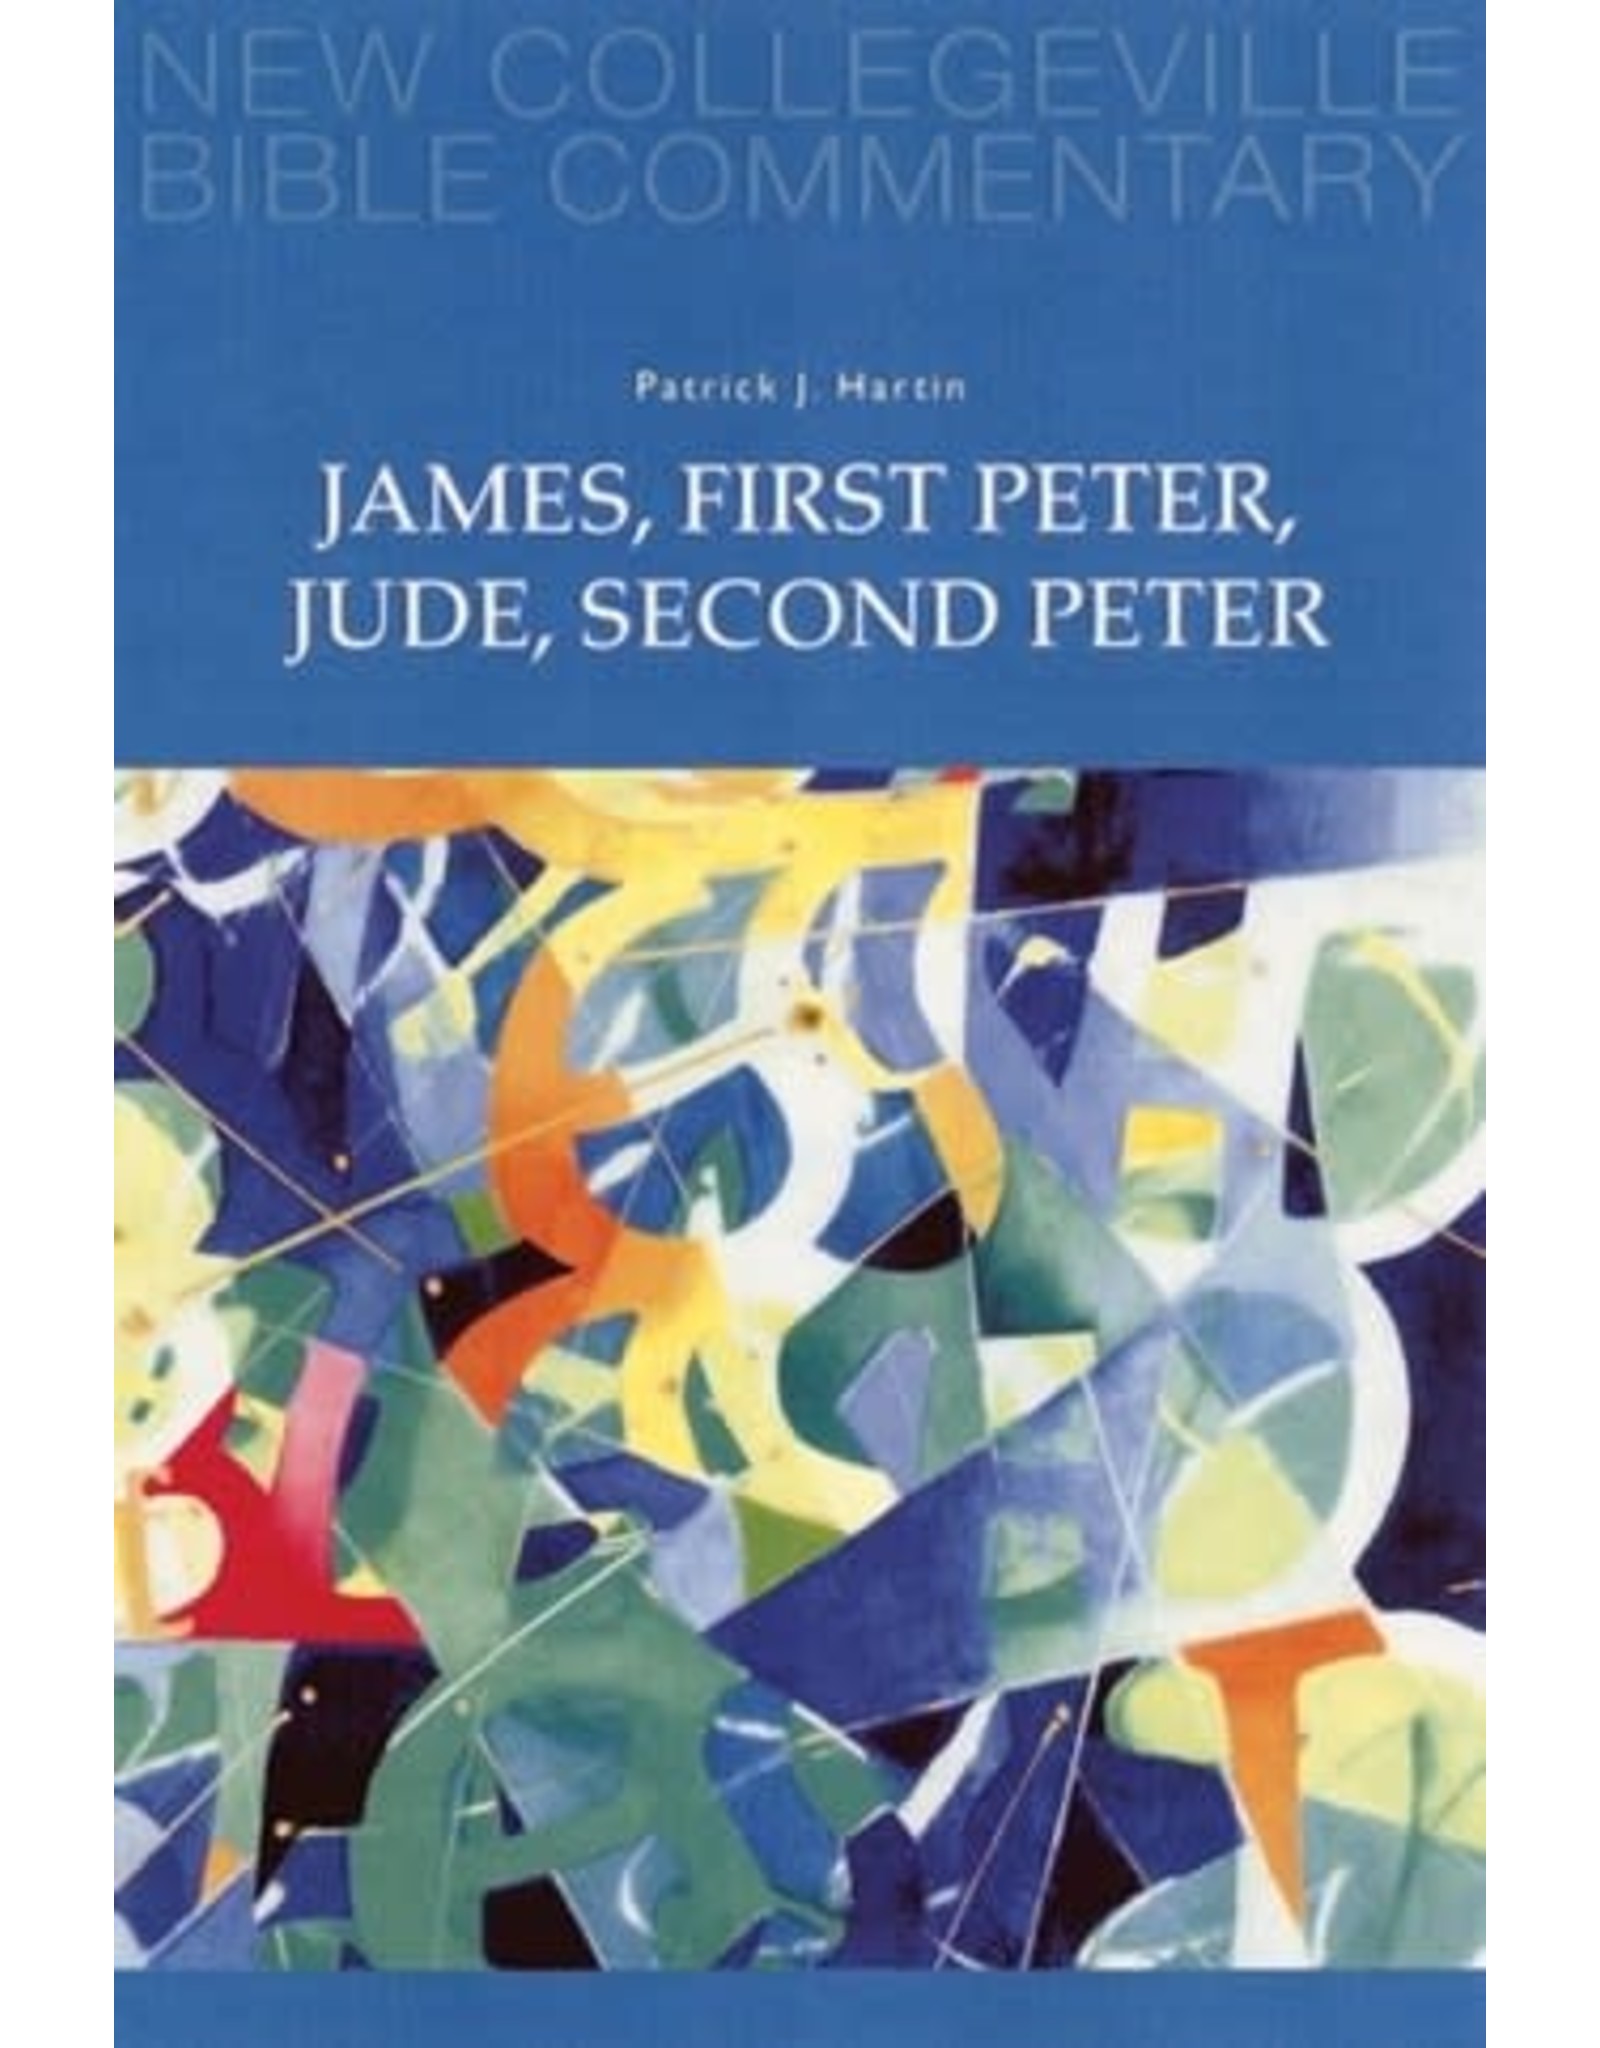 Liturgical Press New Collegeville Bible Commentary: James, First Peter, Jude, Second Peter